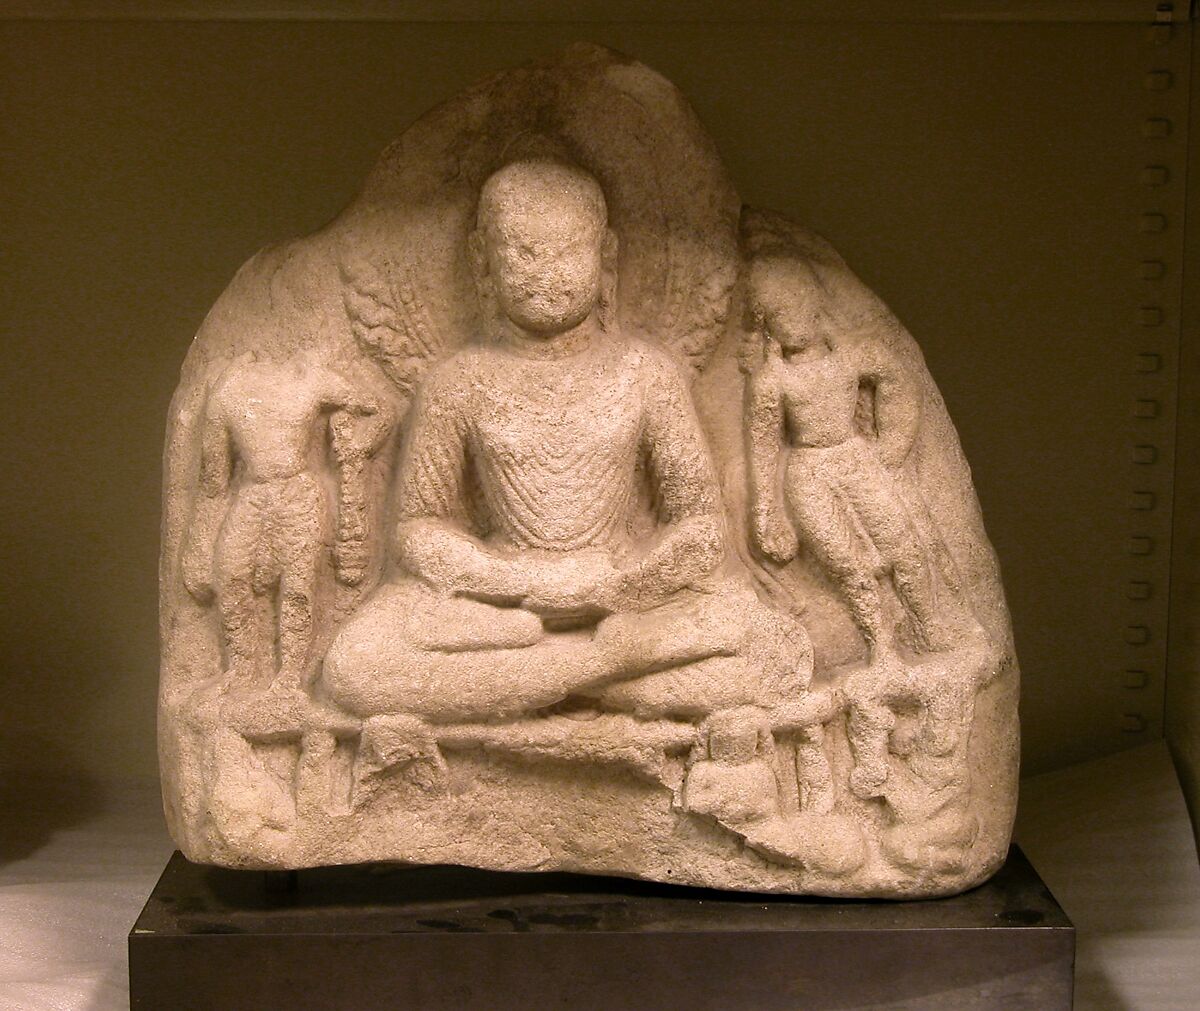 Meditating Buddha Attended by Two Bodhisattvas, Marble, Pakistan (Swat Valley) 